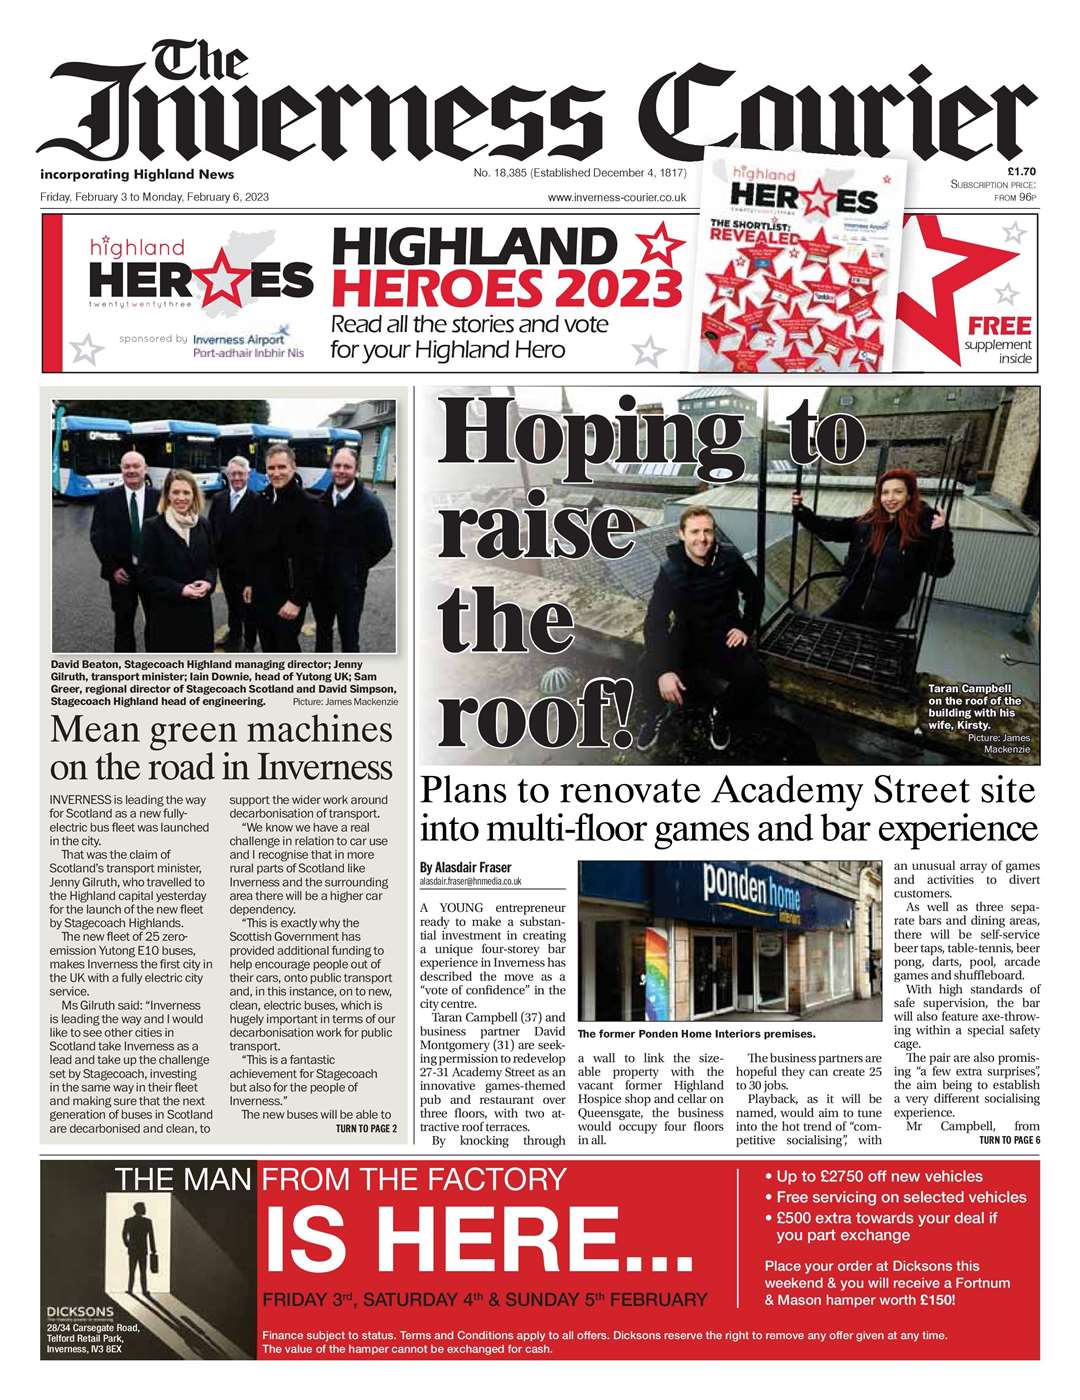 The Inverness Courier, February 3, front page.